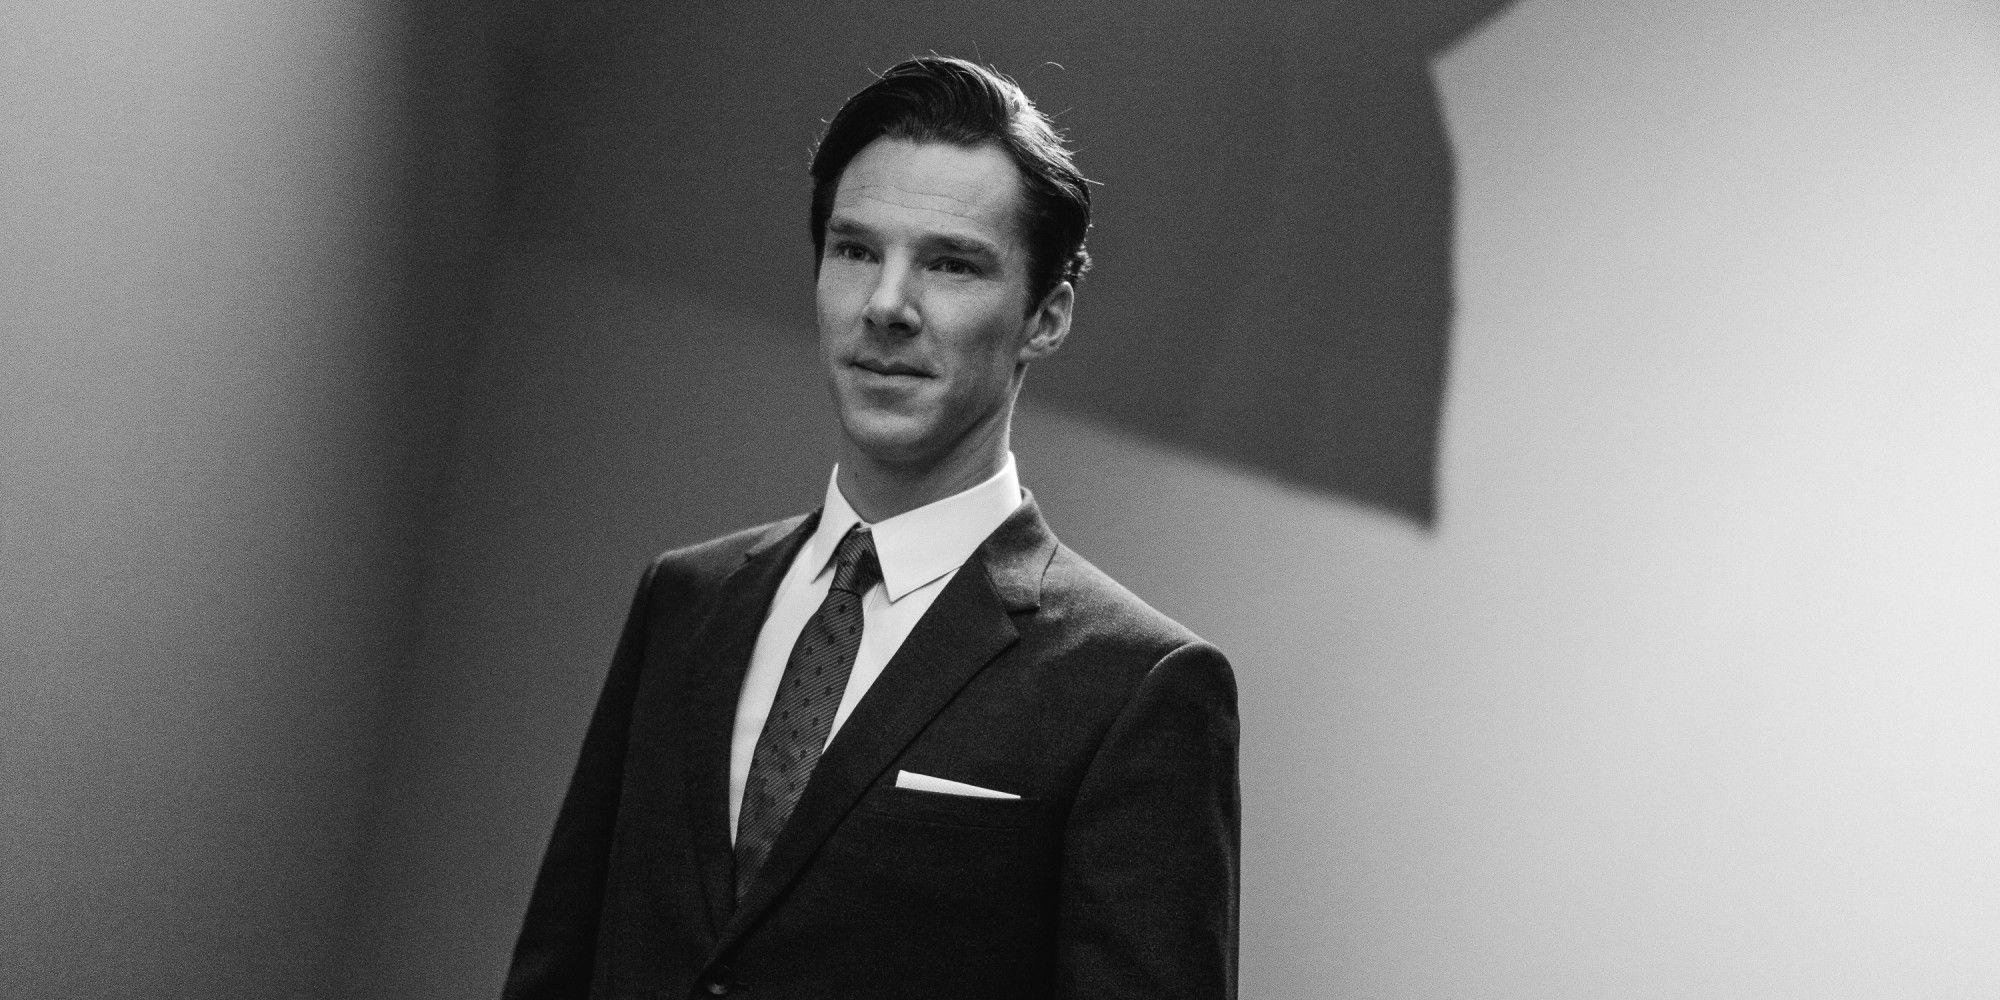 Benedict Cumberbatch Wallpaper High Resolution and Quality Download